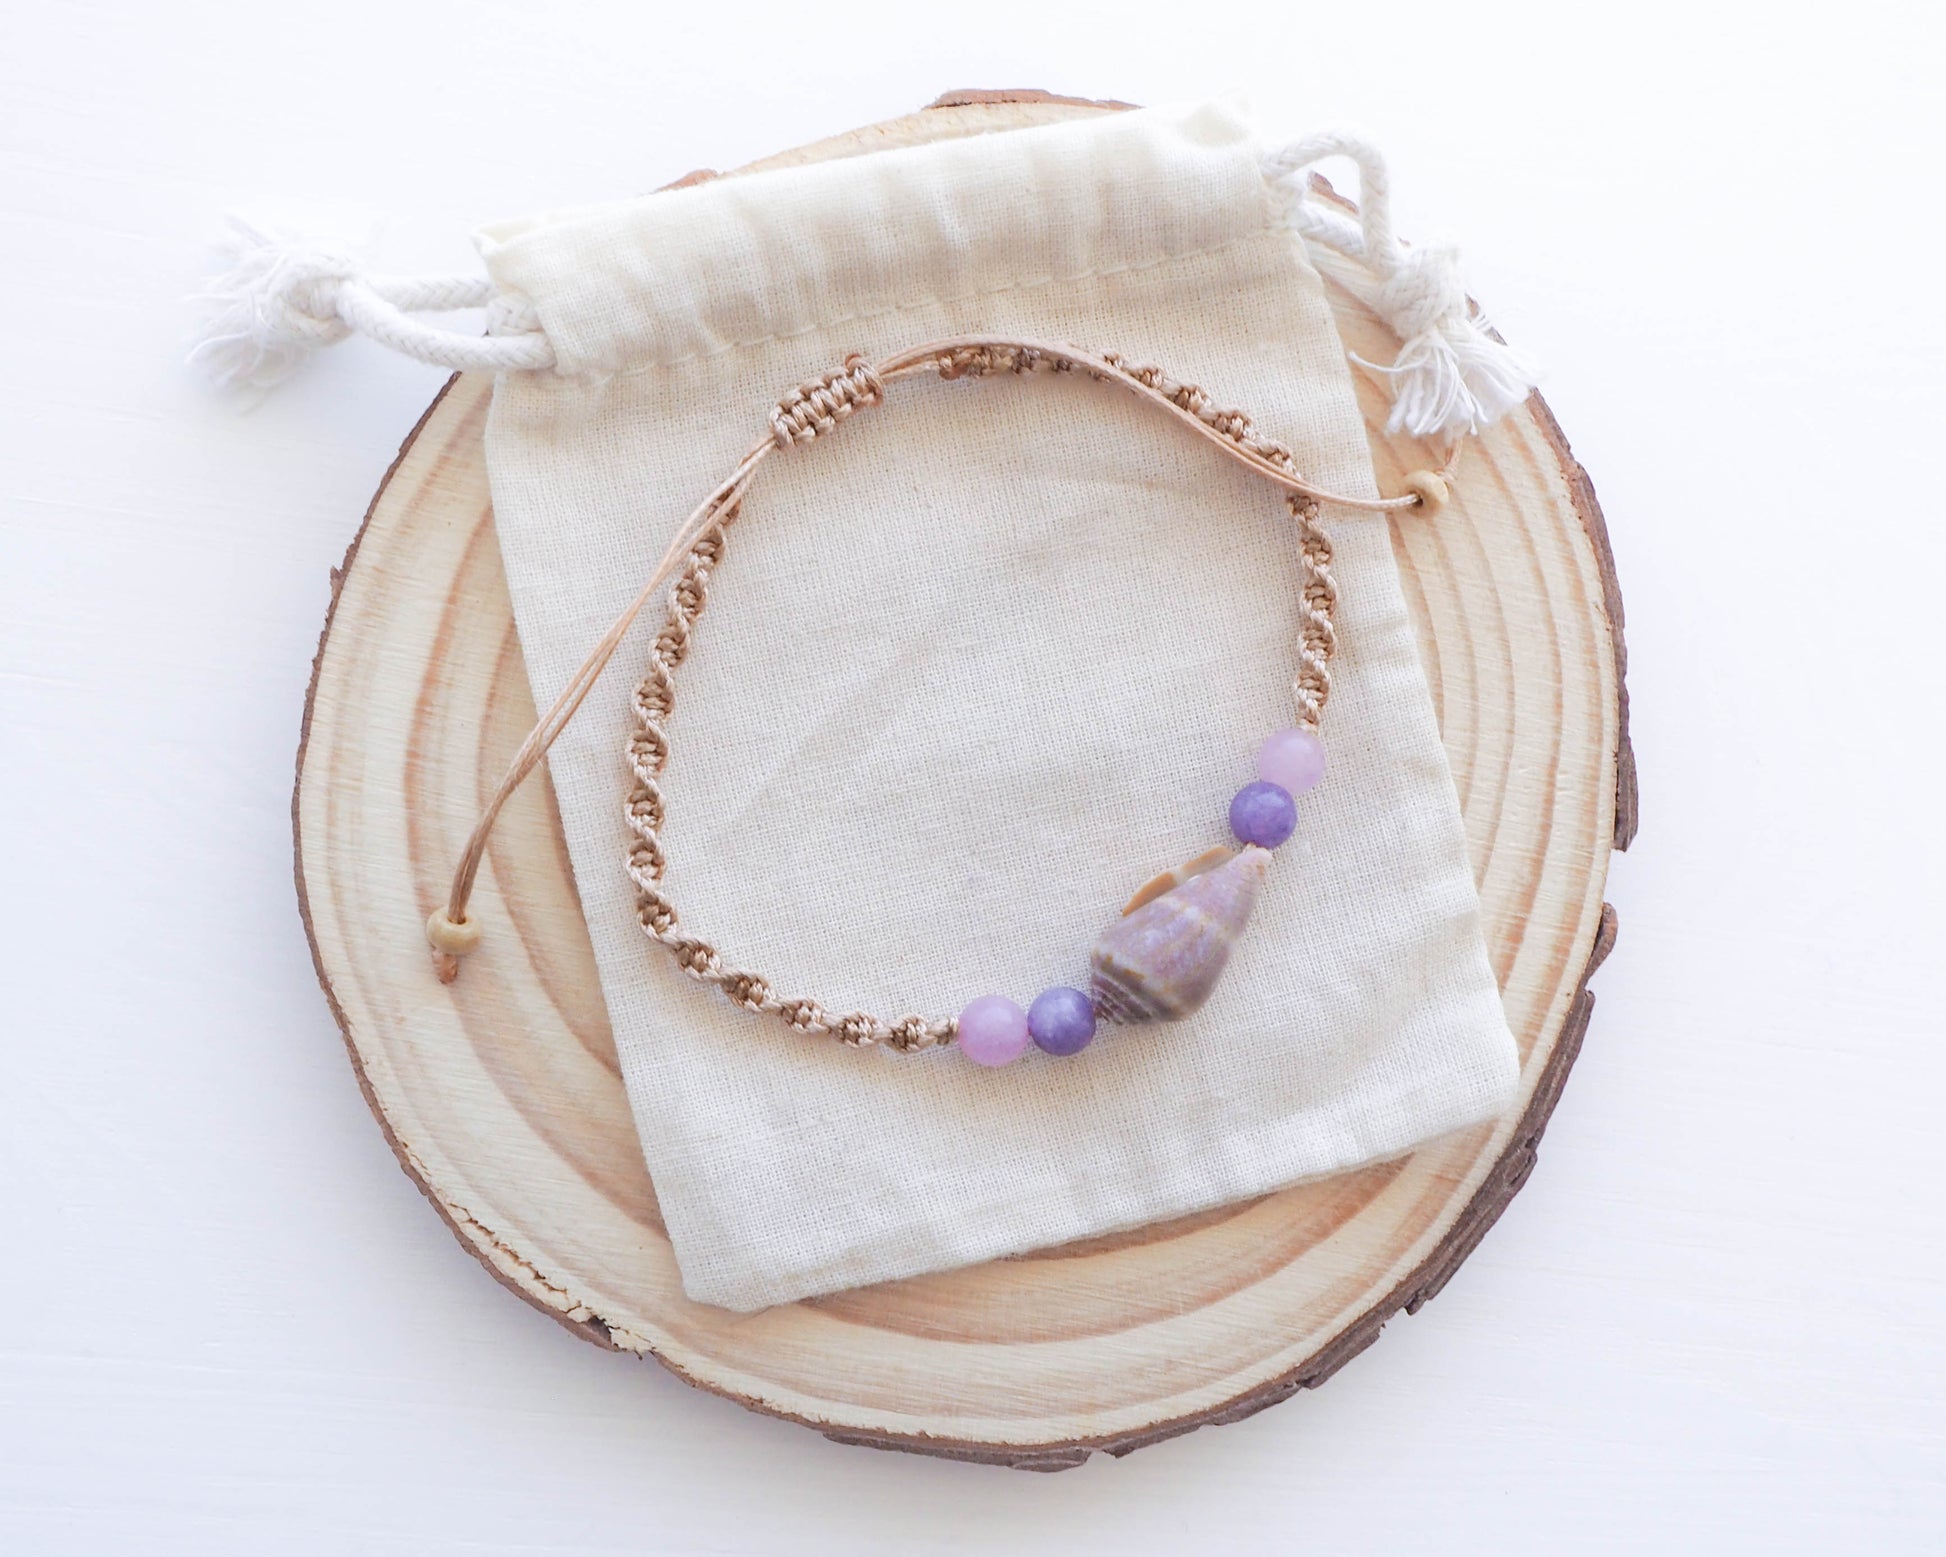 Cone shell bracelet with rose quartz and amethyst beads 